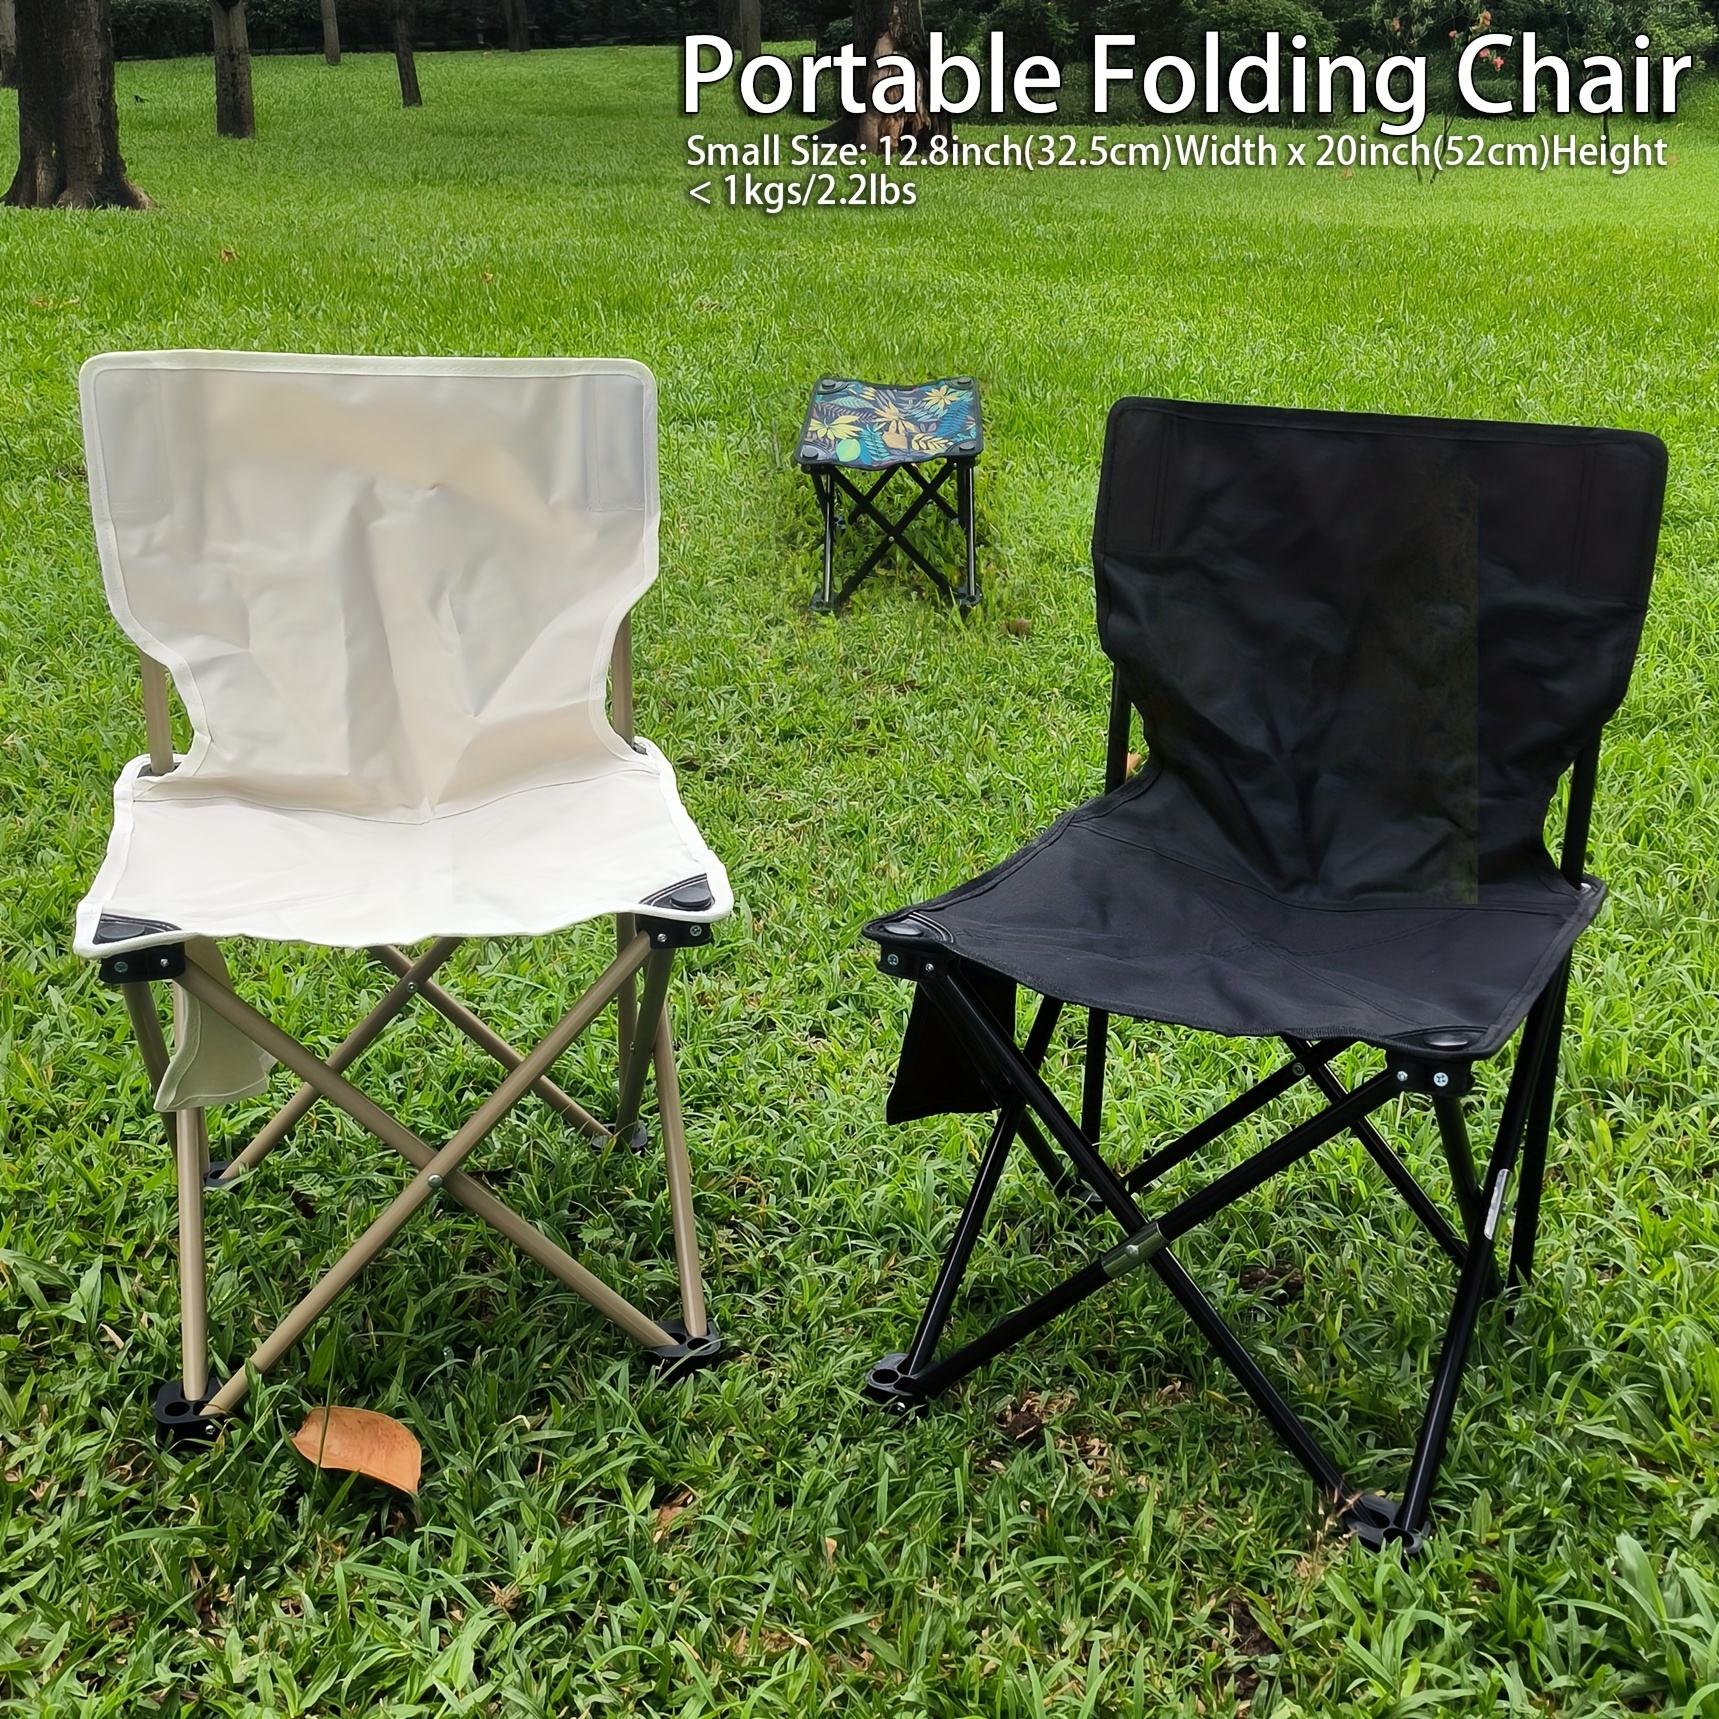 Outdoor 600d Oxford Cloth Folding Large Chair Camping Picnic Beach Chair  Portable Leisure Fishing Chair With